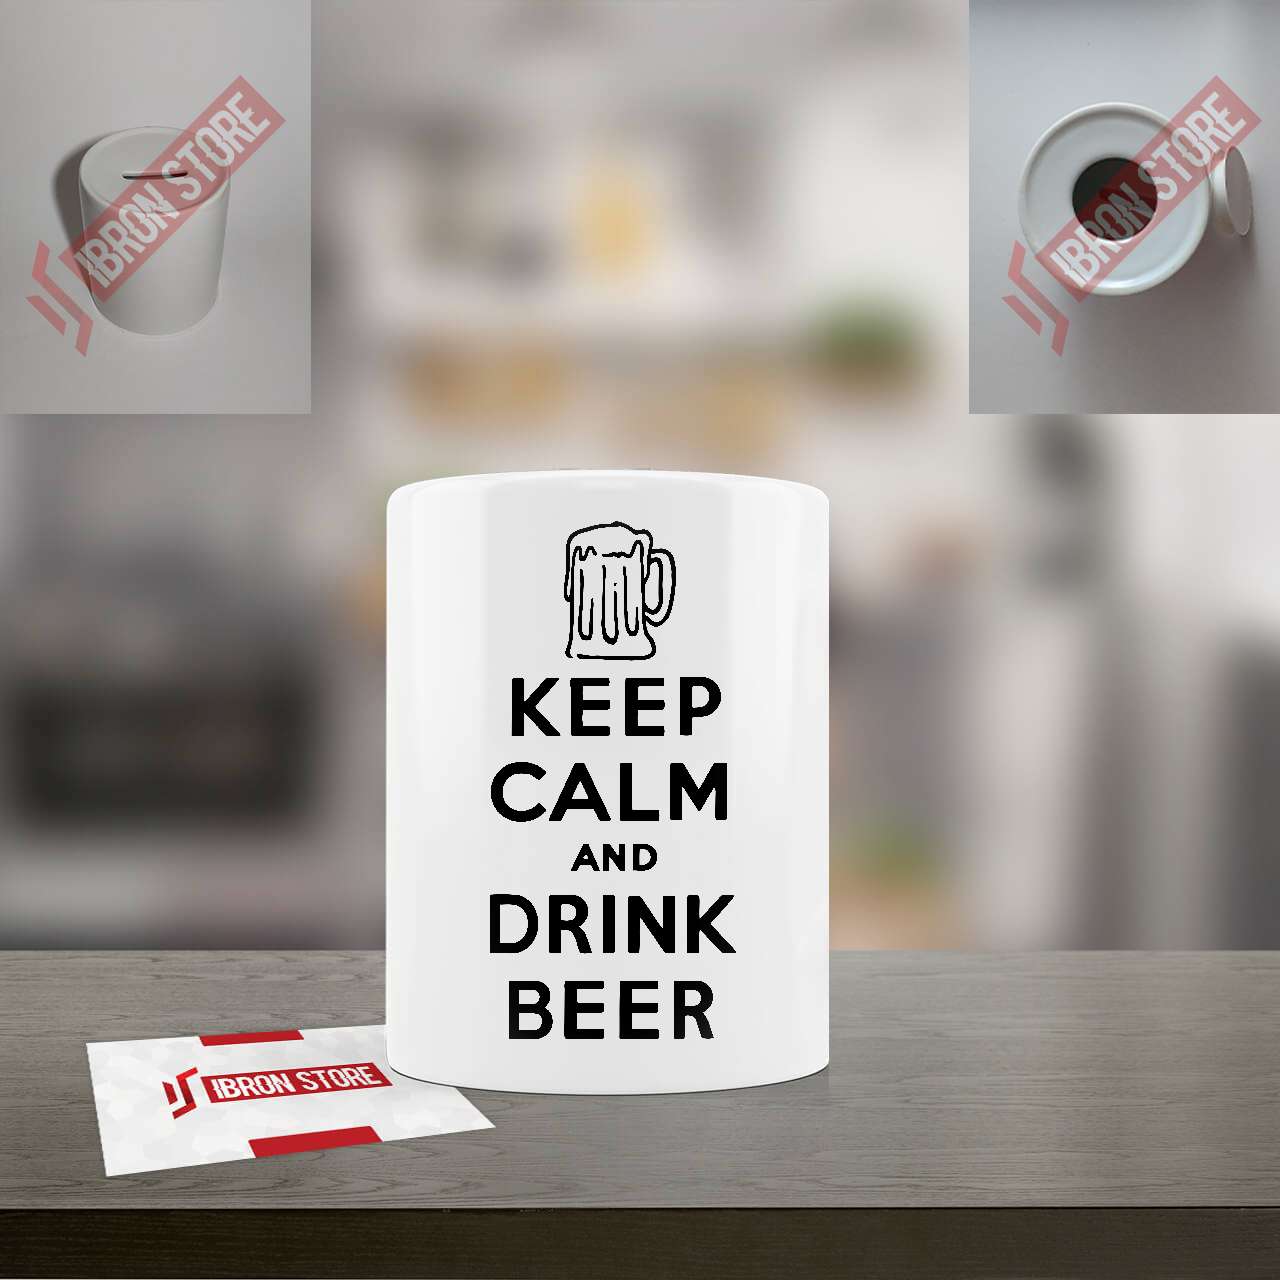 Keep calm and drink beer 2 mintás persely